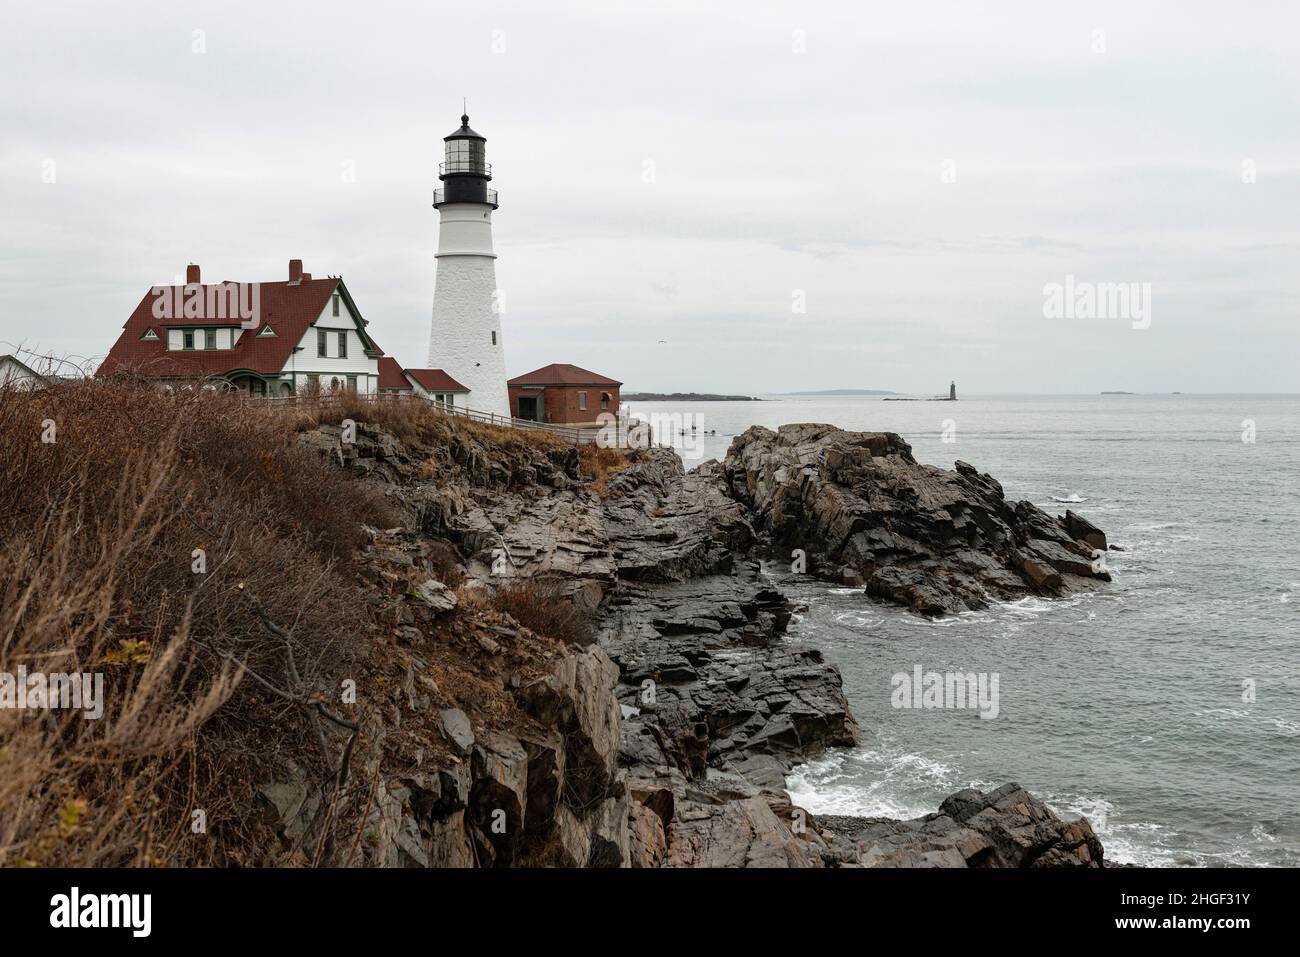 Portland Head lighthouse in Fort Williams Park in Cape Elizabeth just outside of Portland, Maine on Casco Bay. Stock Photo